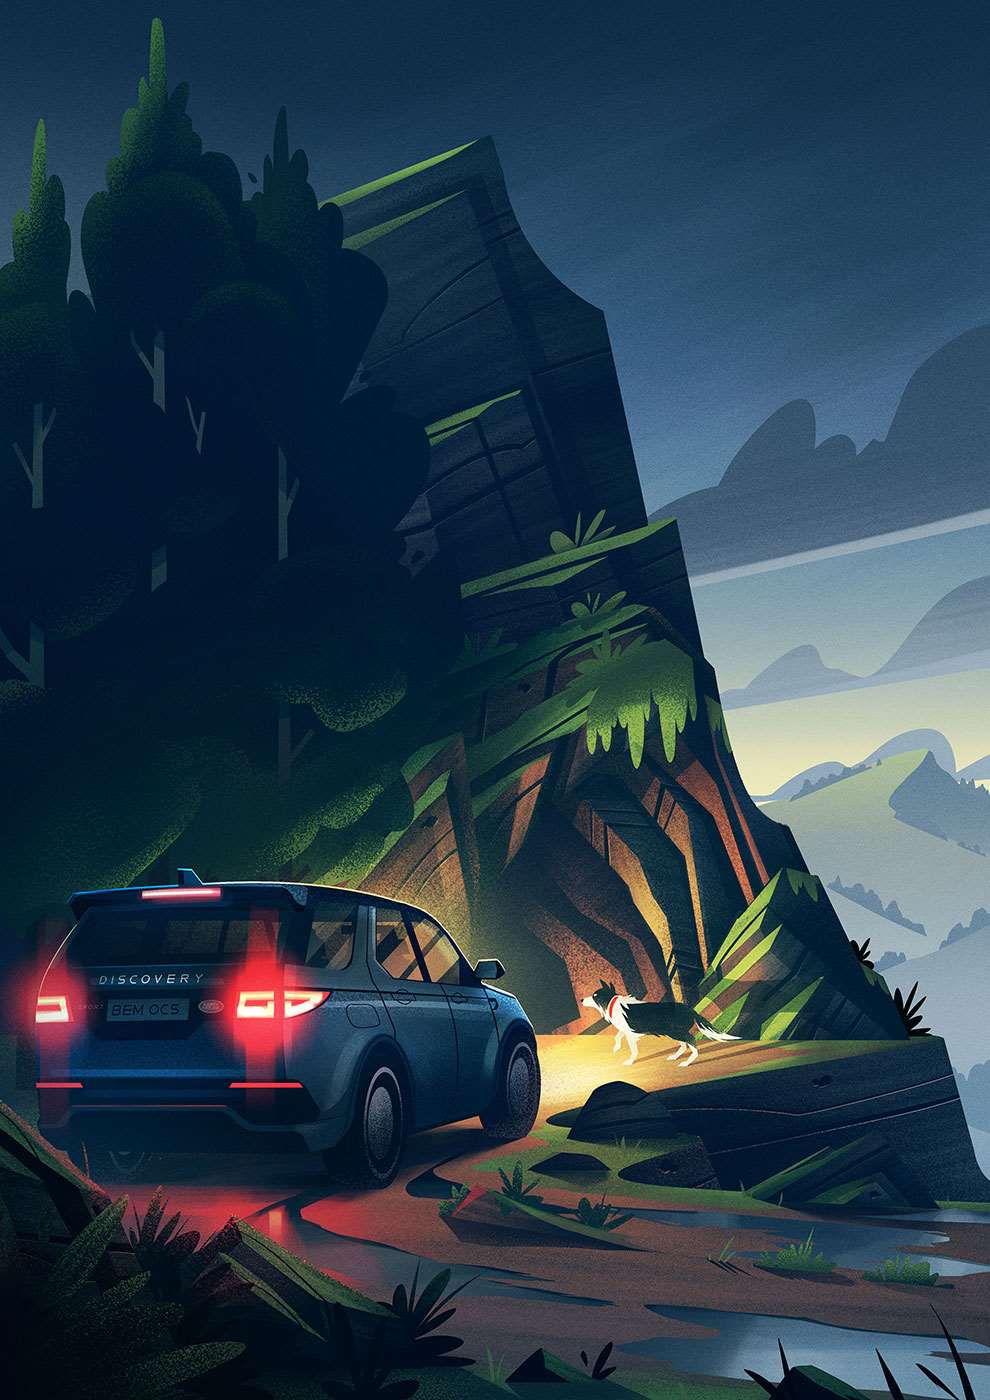 Brian Edward Miller, Family adventure digital illustration for Land Rover featuring a car in the dark in the mountains with headlights on.